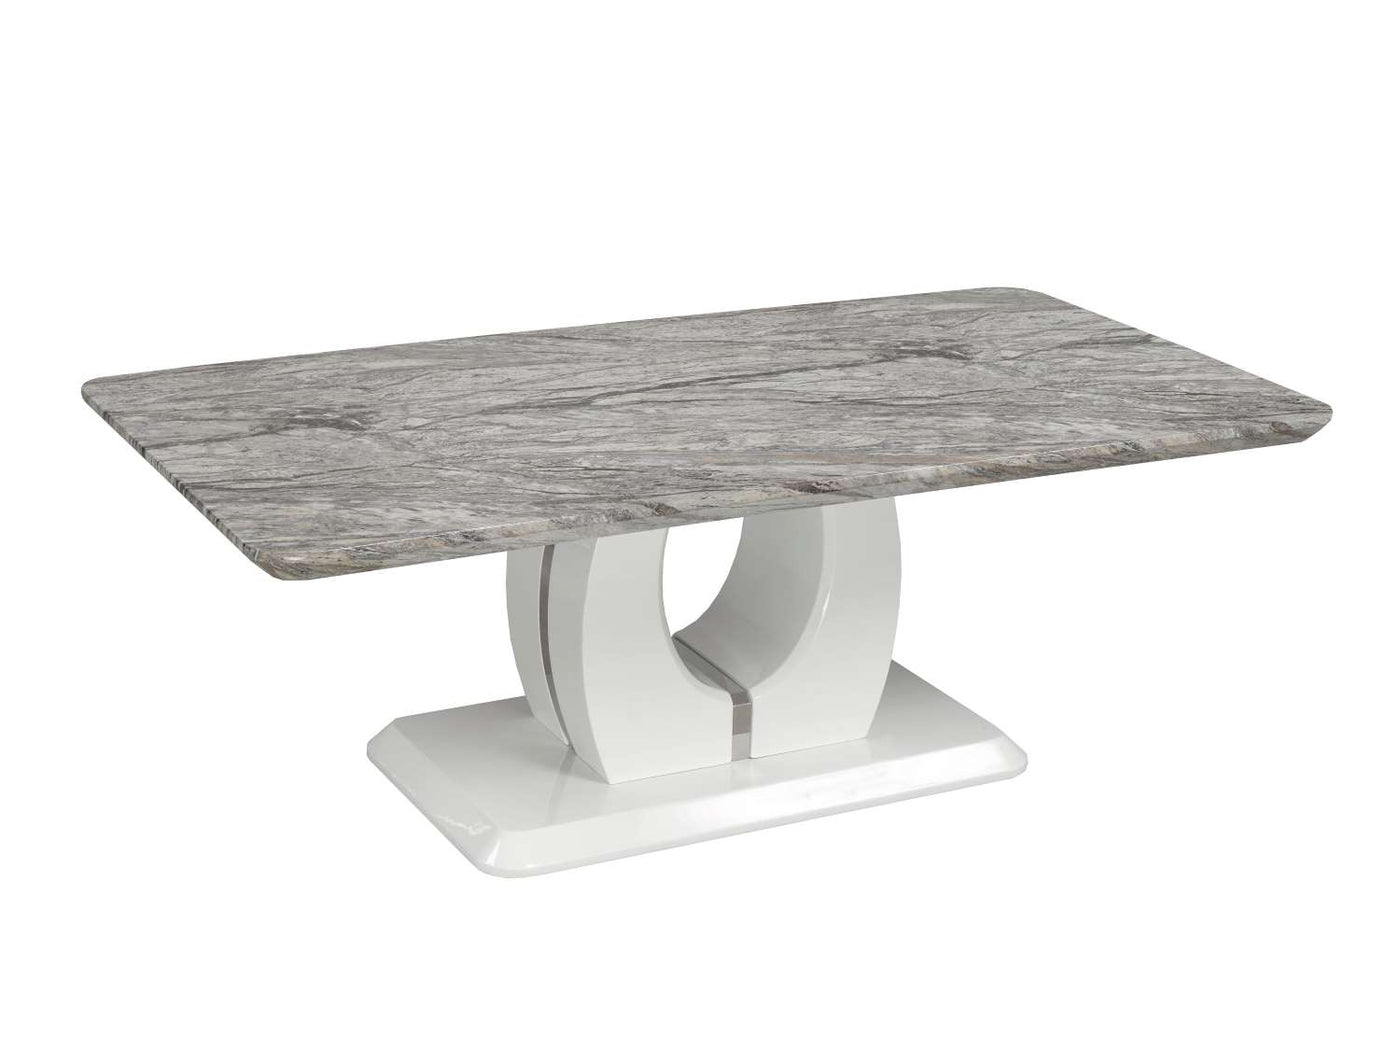 Salentino Coffee Table - Antique White and Grey